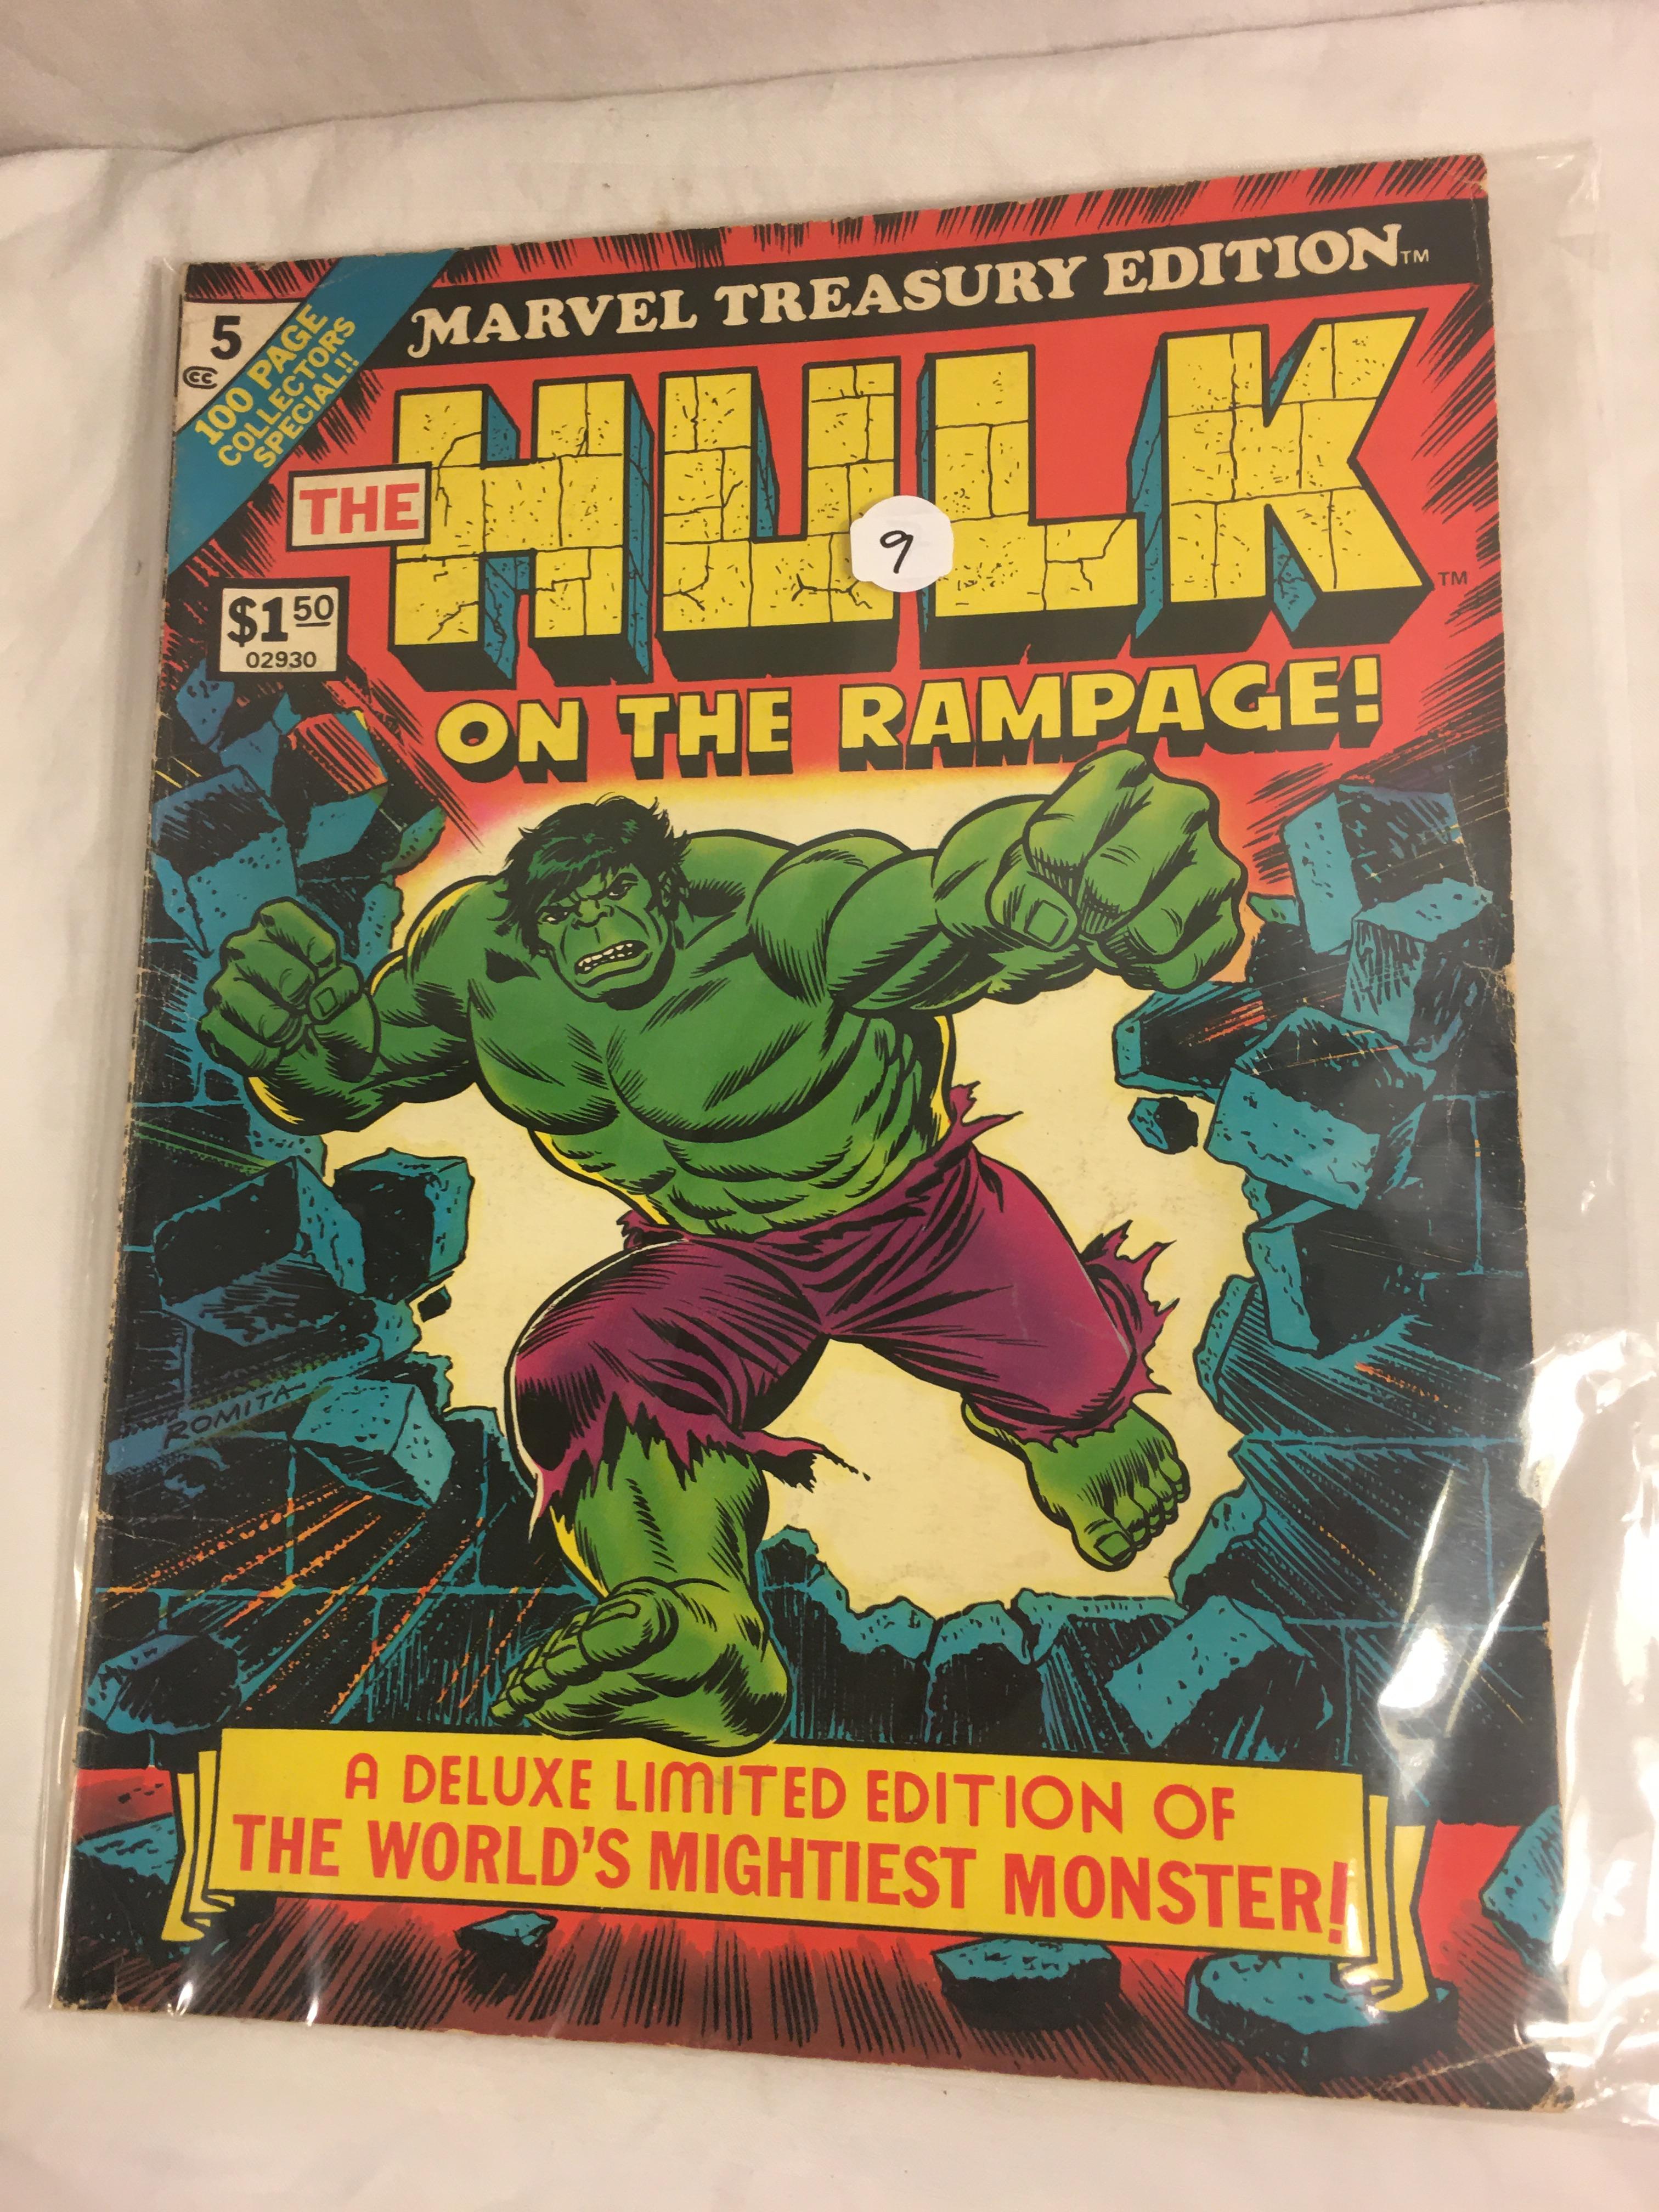 Collector Vintage Marvel Treasury Edition The Hulk on The Rampage Deluxe Limited Edition